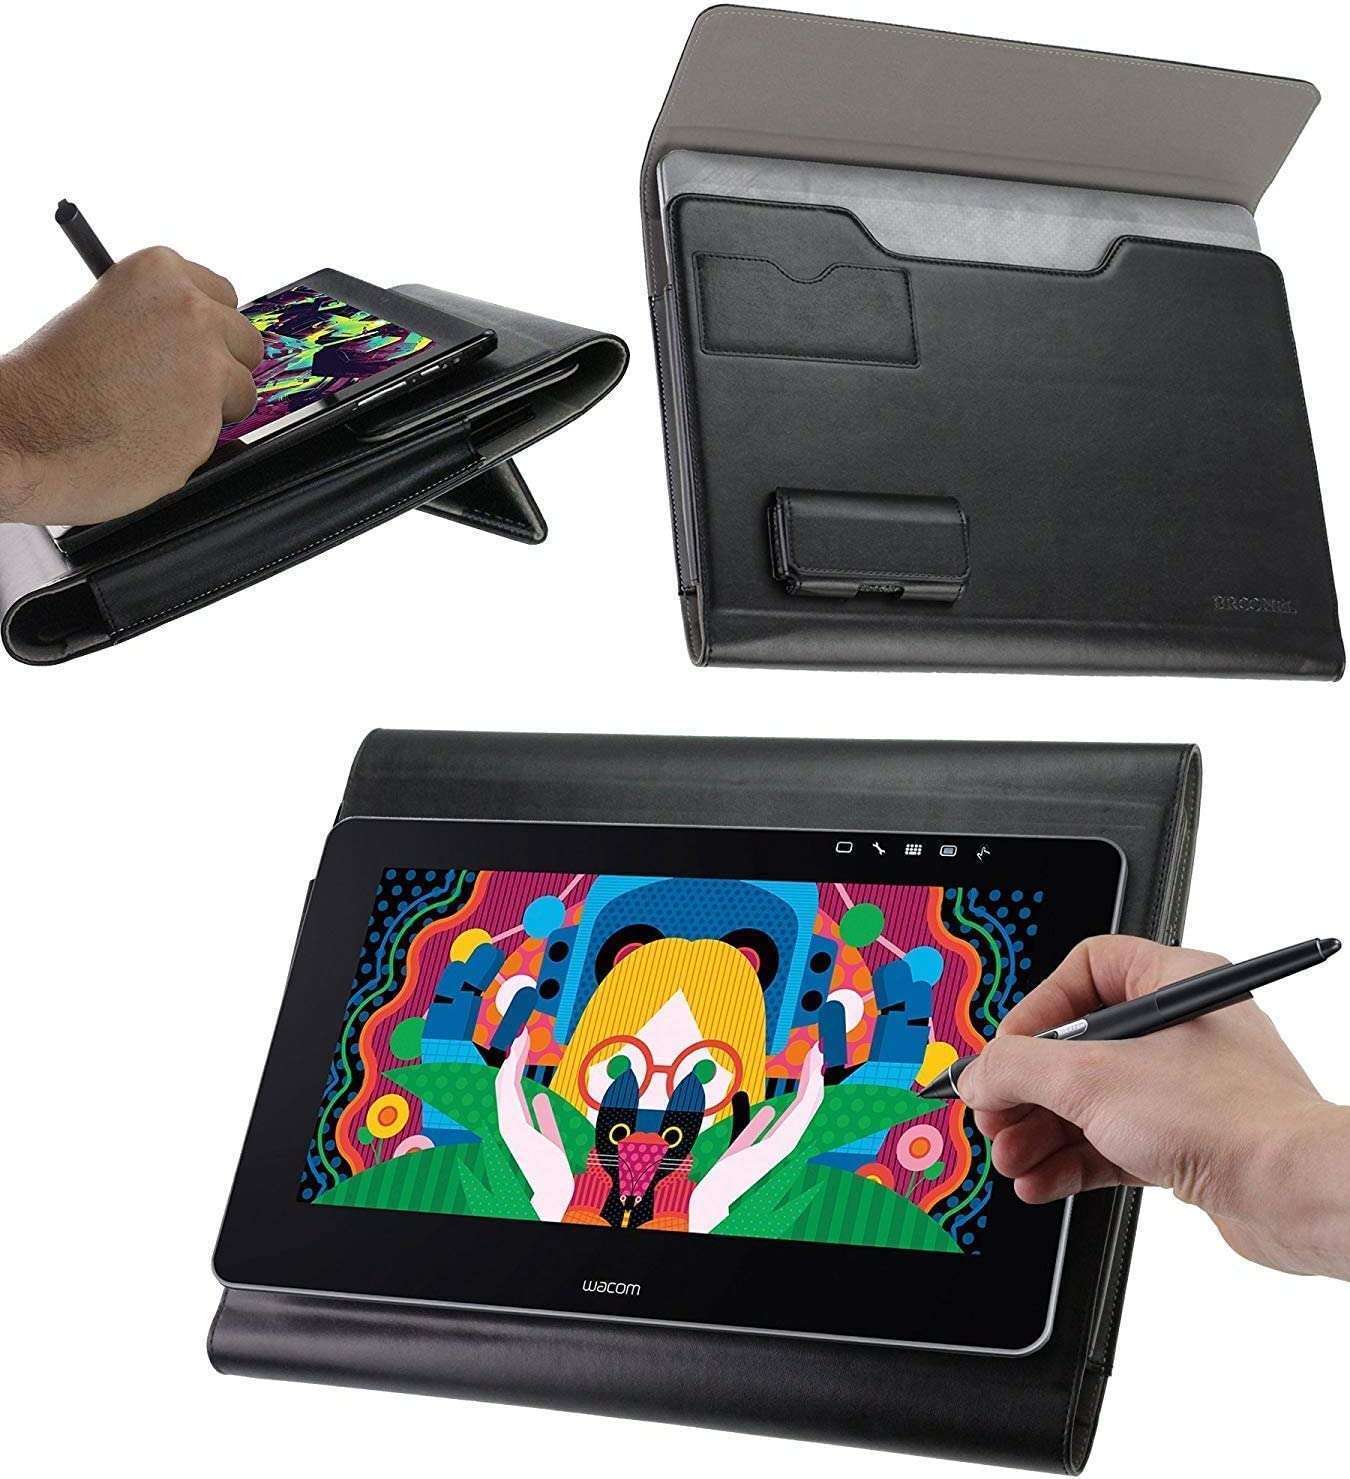 Broonel Leather Graphics Tablet Folio Case For UGEE S1060W Graphics Tablet